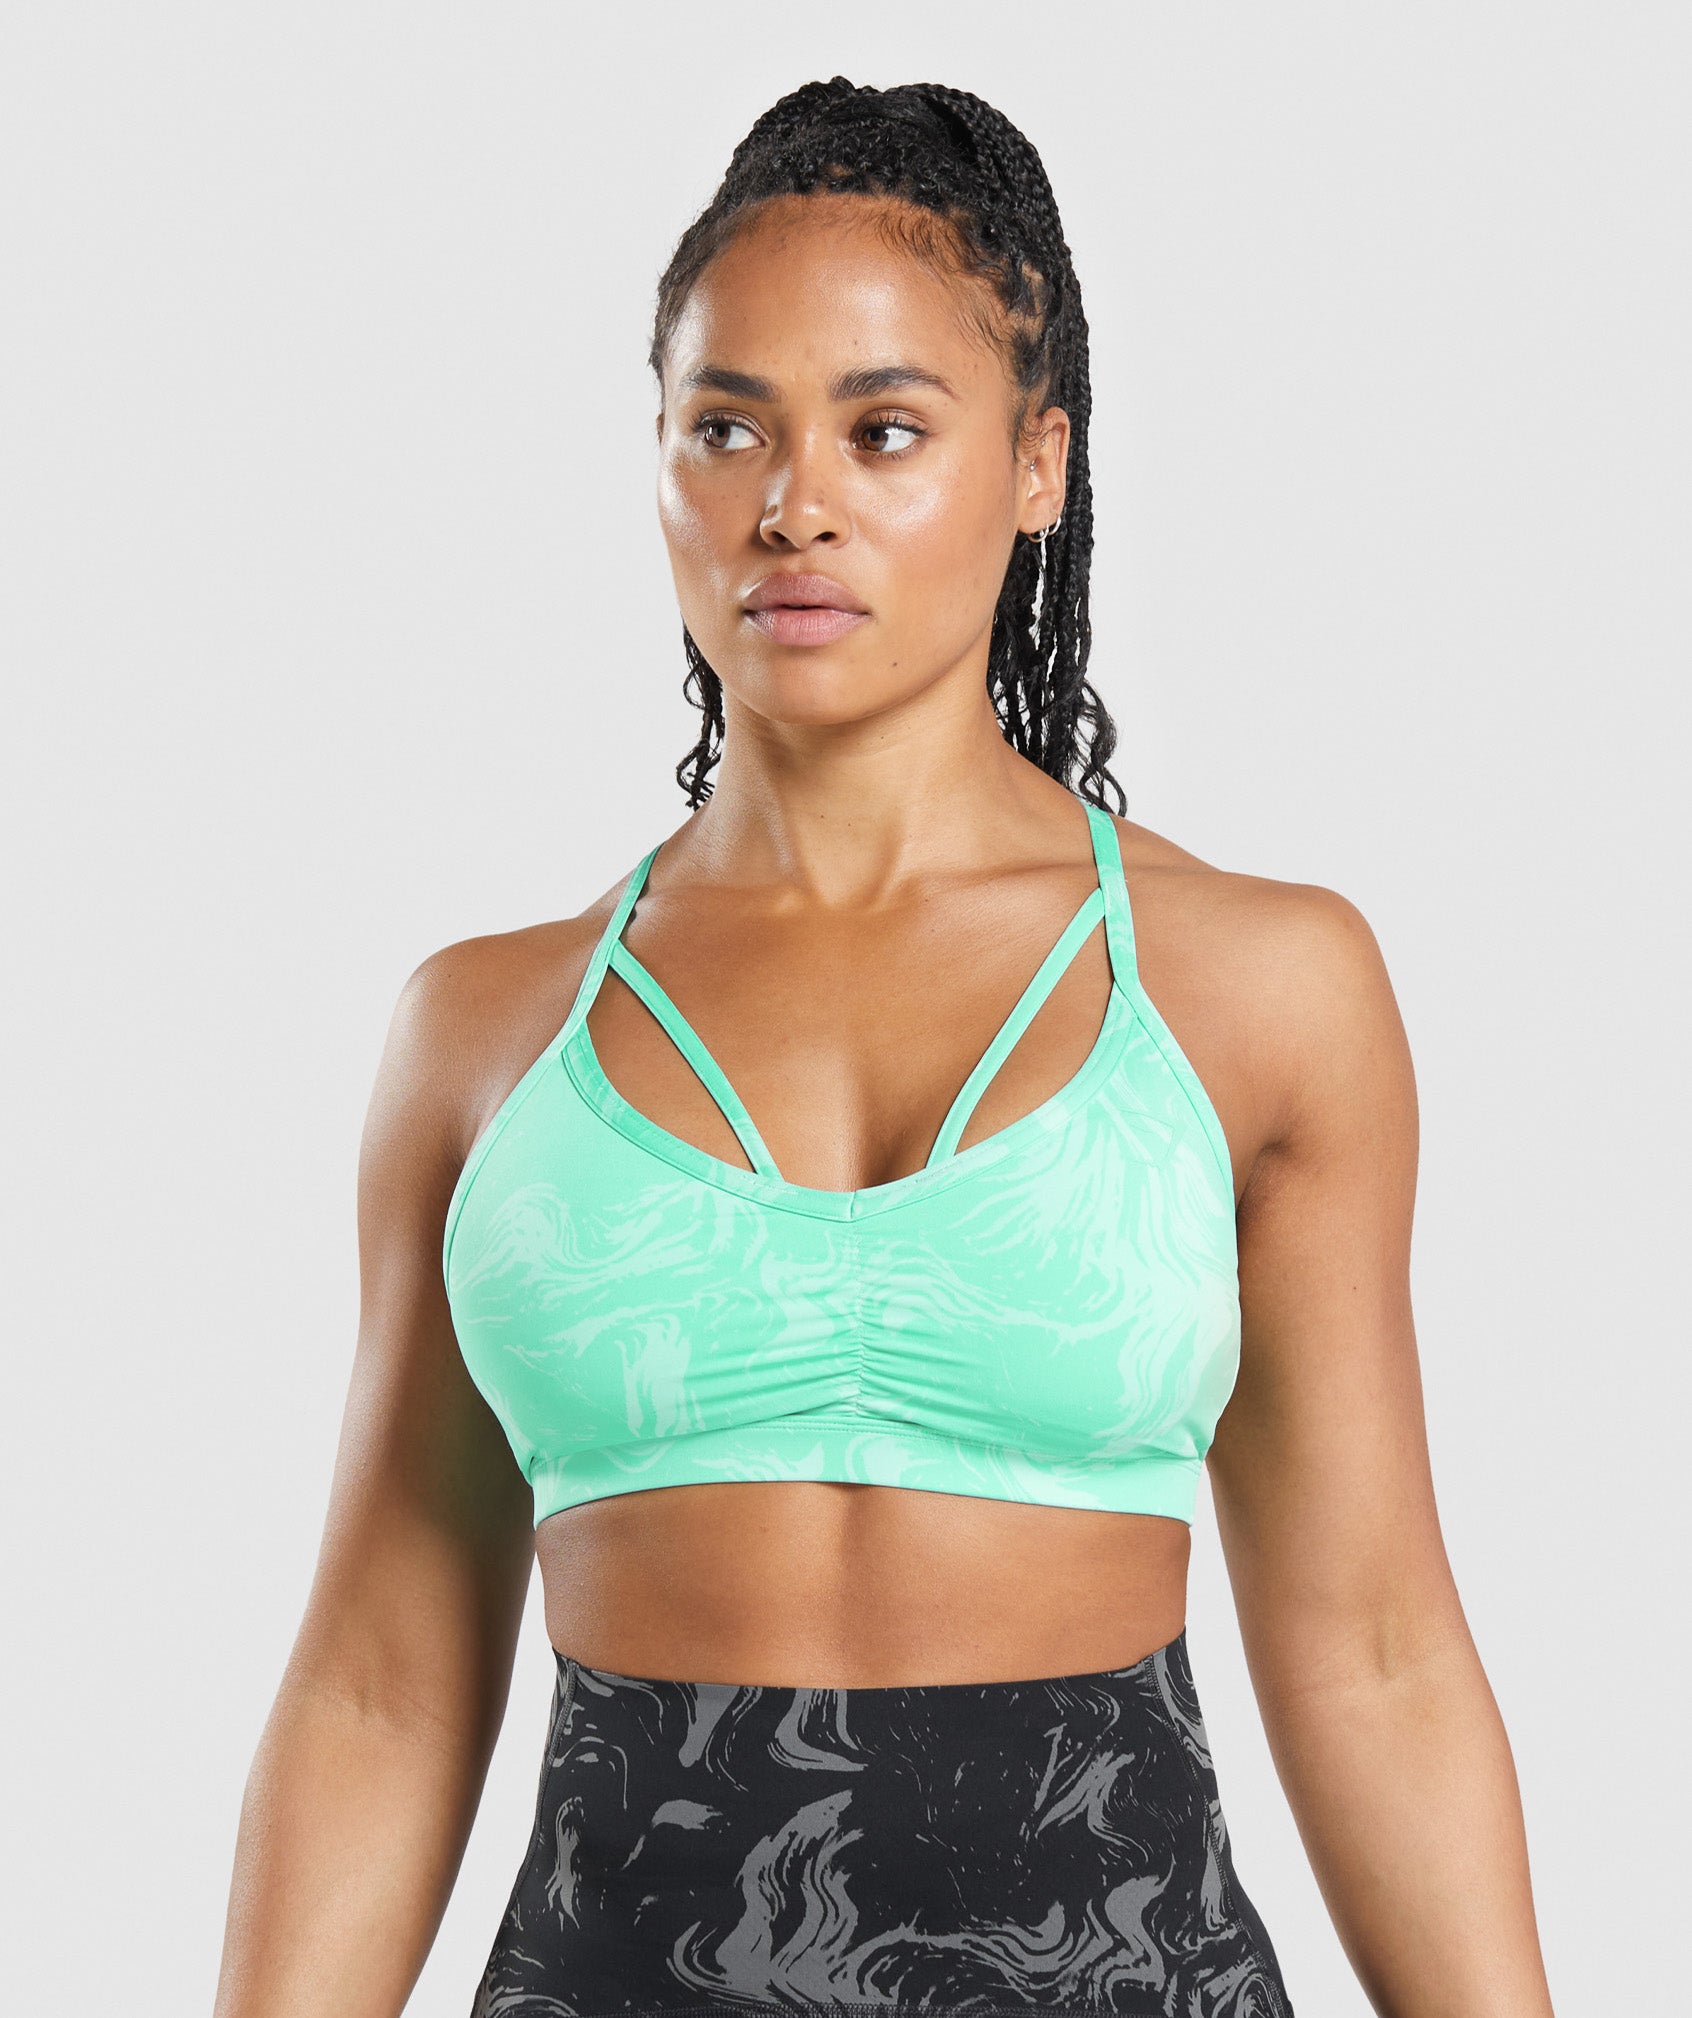 Gymshark CROSSOVER SPORTS BRA in Desert Sage Green Size Small ($36) - $28  New With Tags - From Brooke